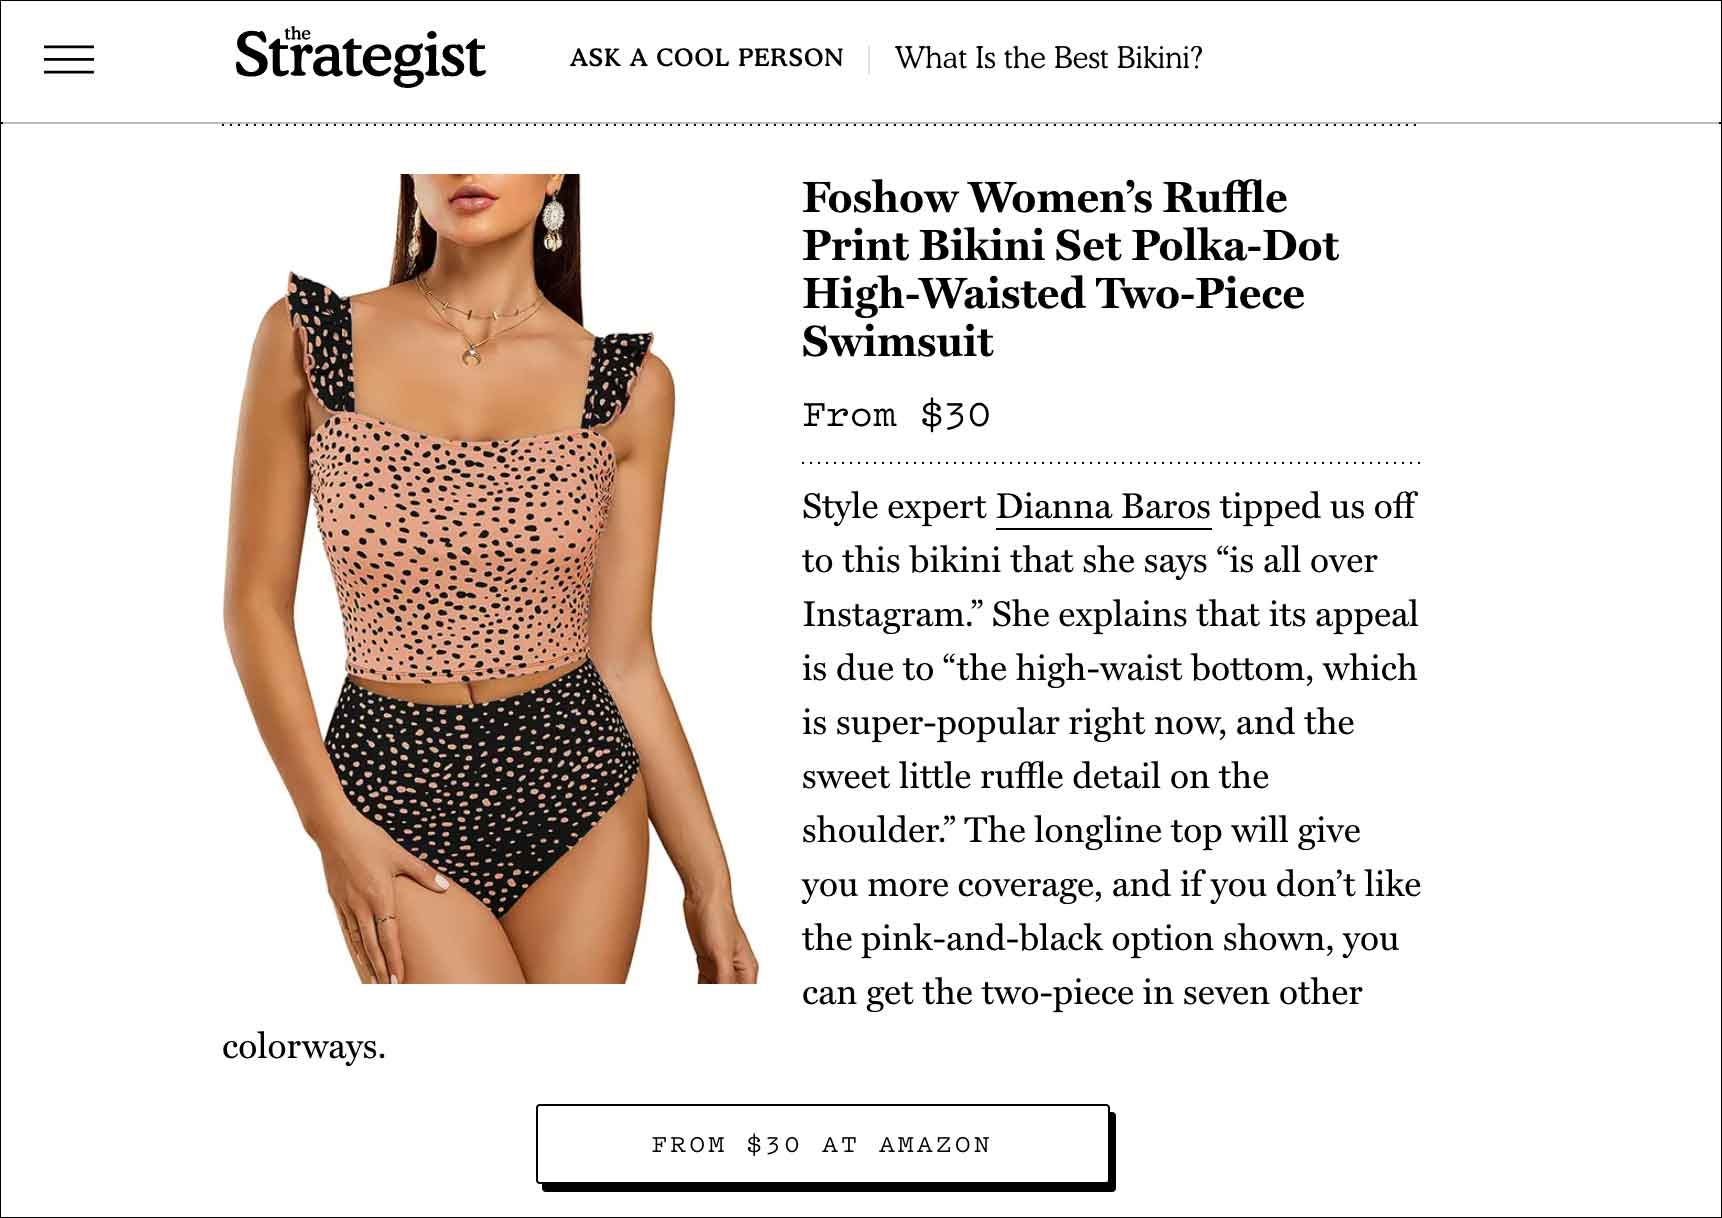 Dianna Baros shares top bikini picks for 2021 with The Strategist.